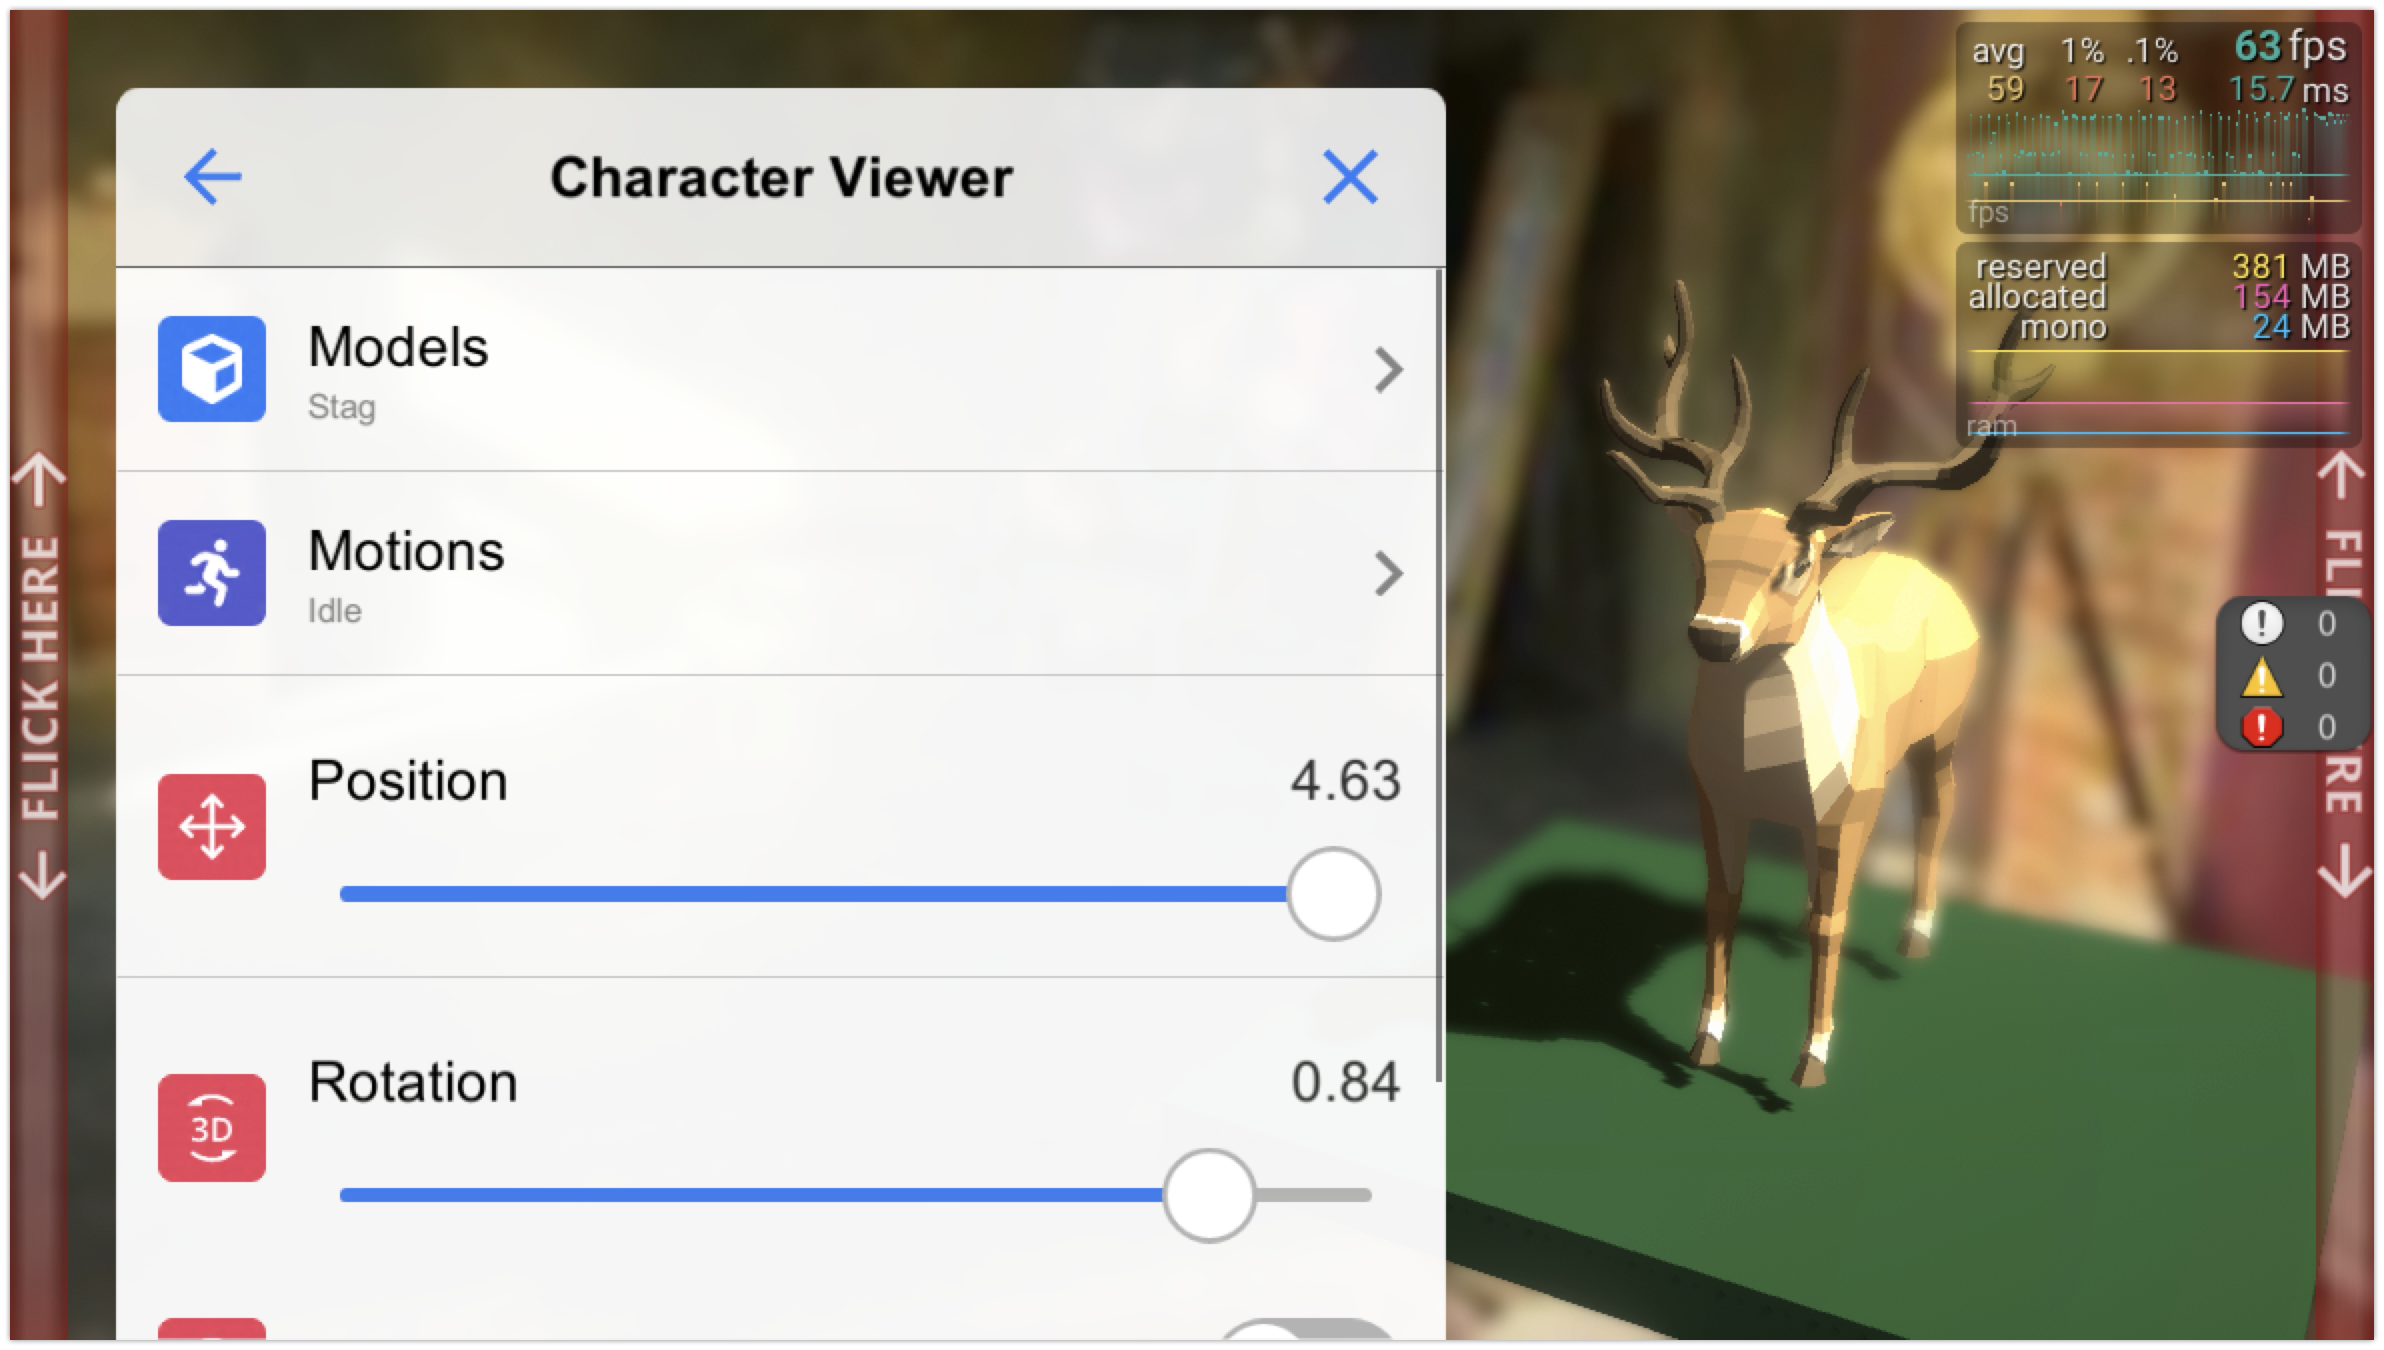 Character Viewer Demo